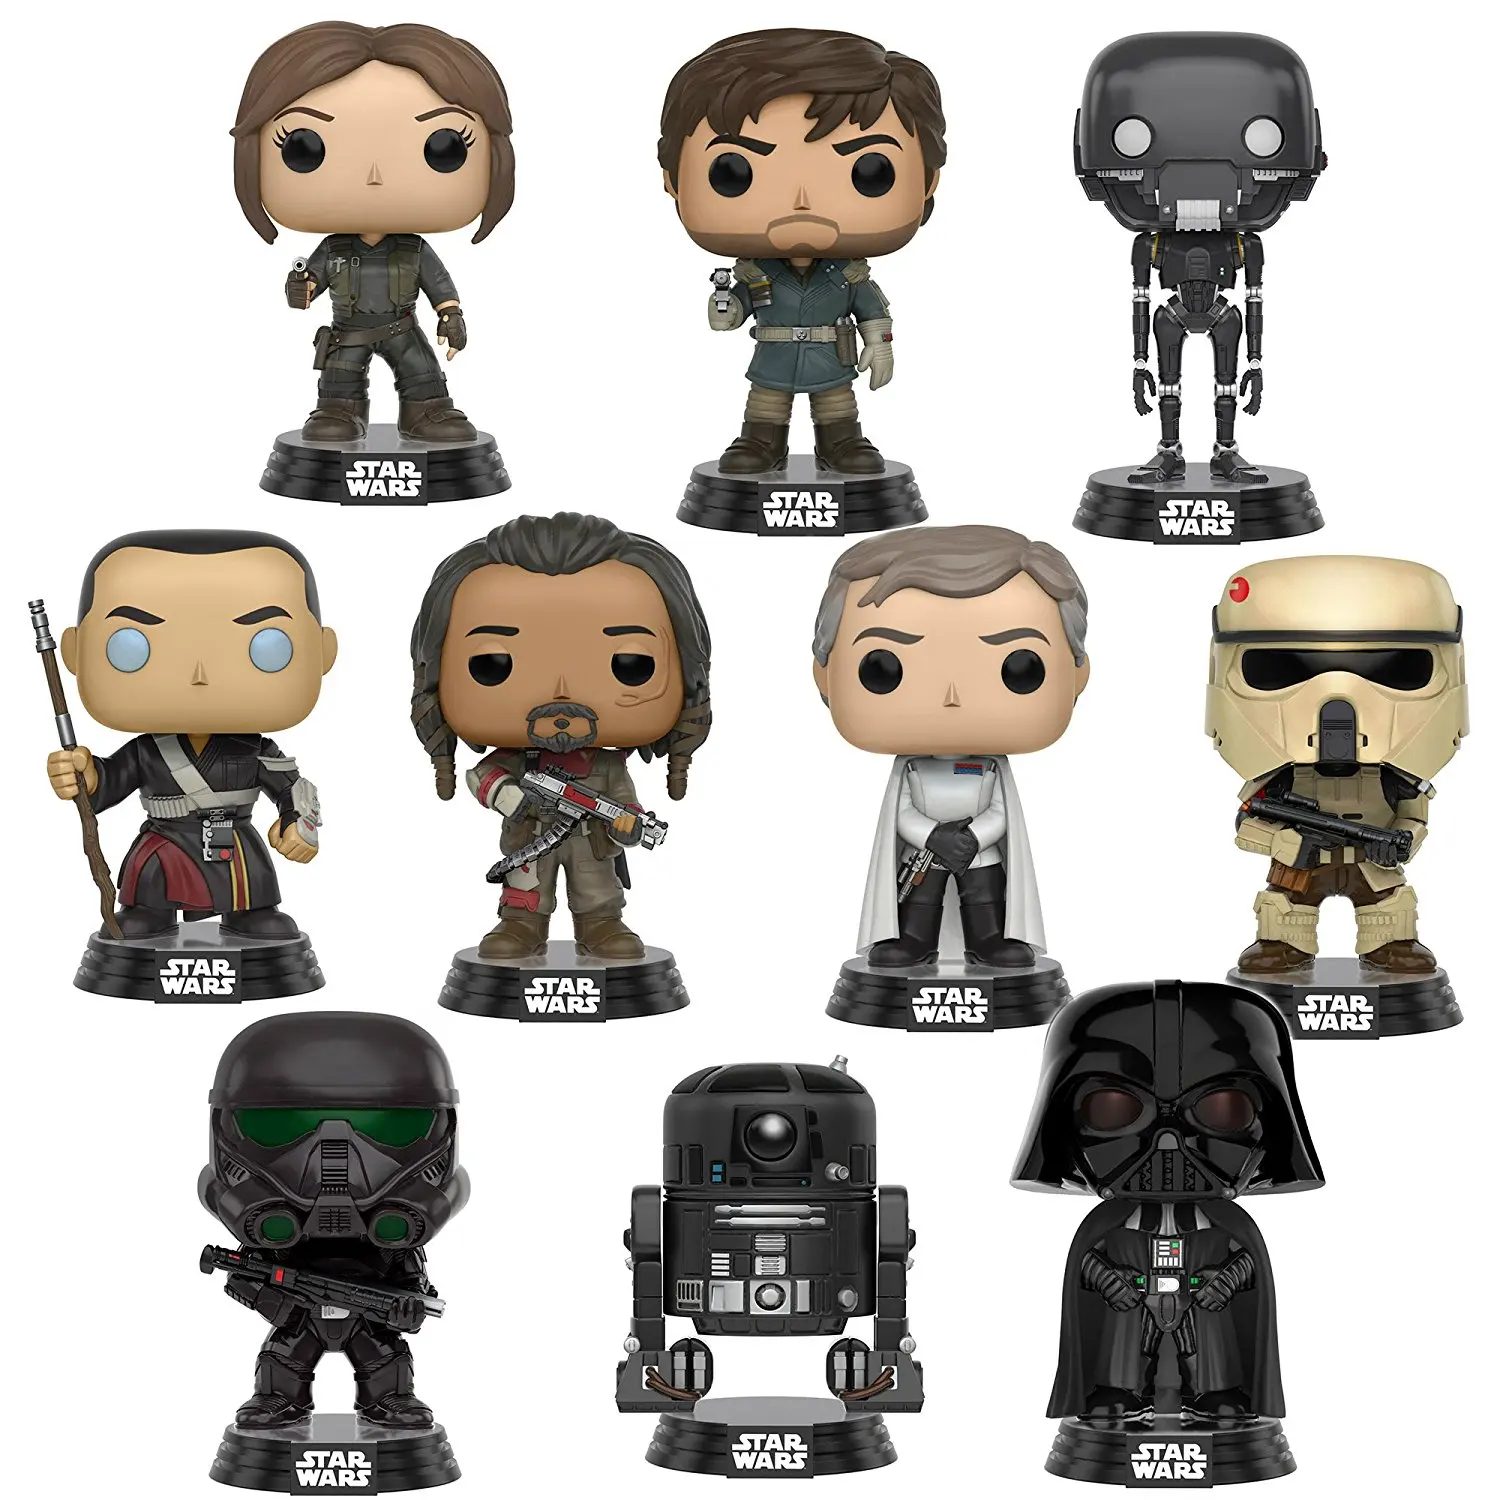 Buy Pop Star Wars Rogue One Jyn Erso Captain Cassian Andor K 2so Chirrut Icirc Mwe Baze Malbus Orson Krennic Scarif Death Trooper Darth Vader And C2 B5 Set Of 10 In Cheap Price On